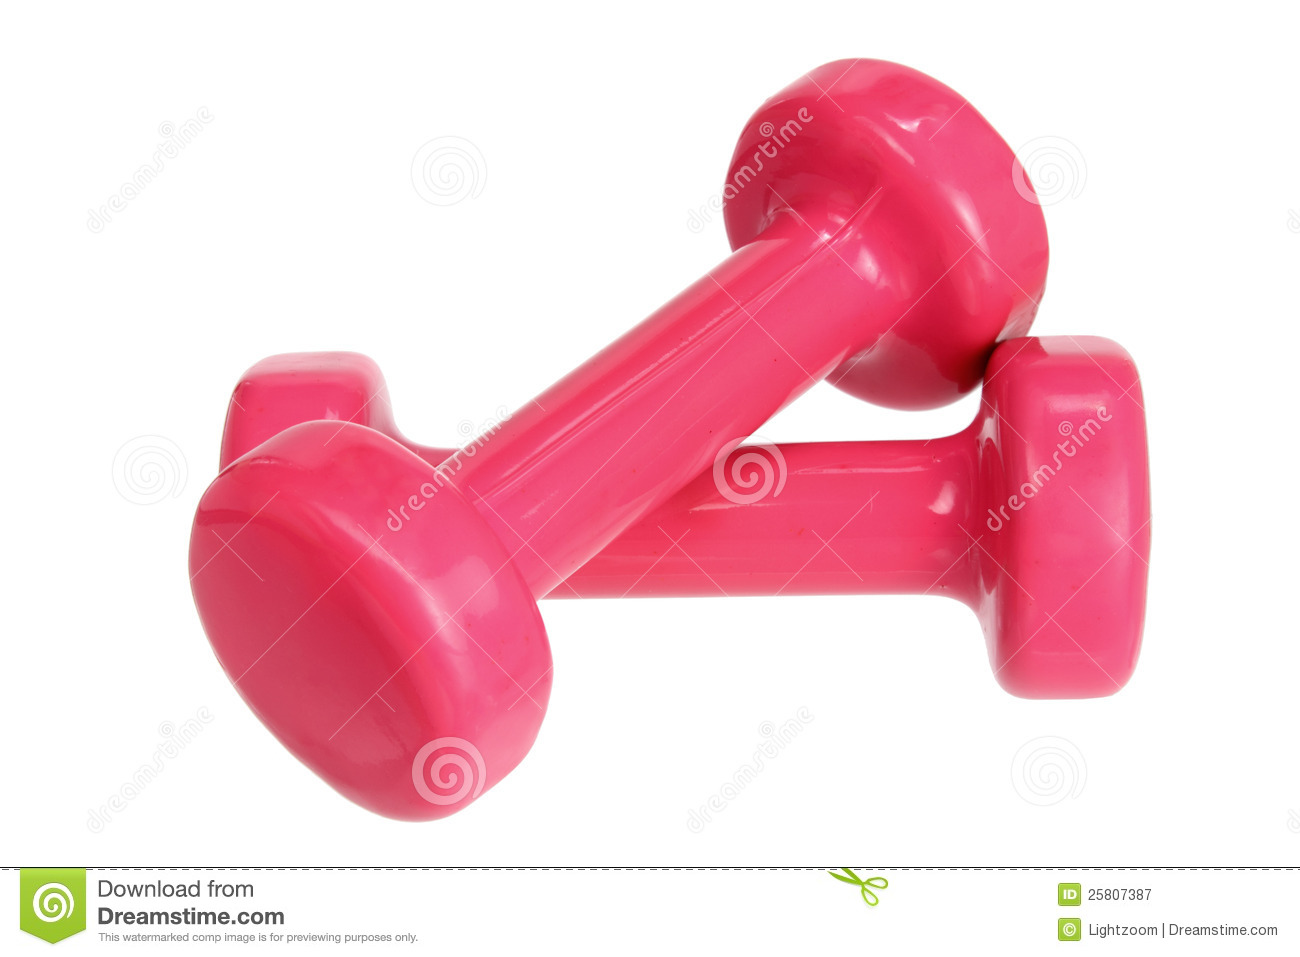 Dumb Bells Royalty Free Stock Photography   Image  25807387